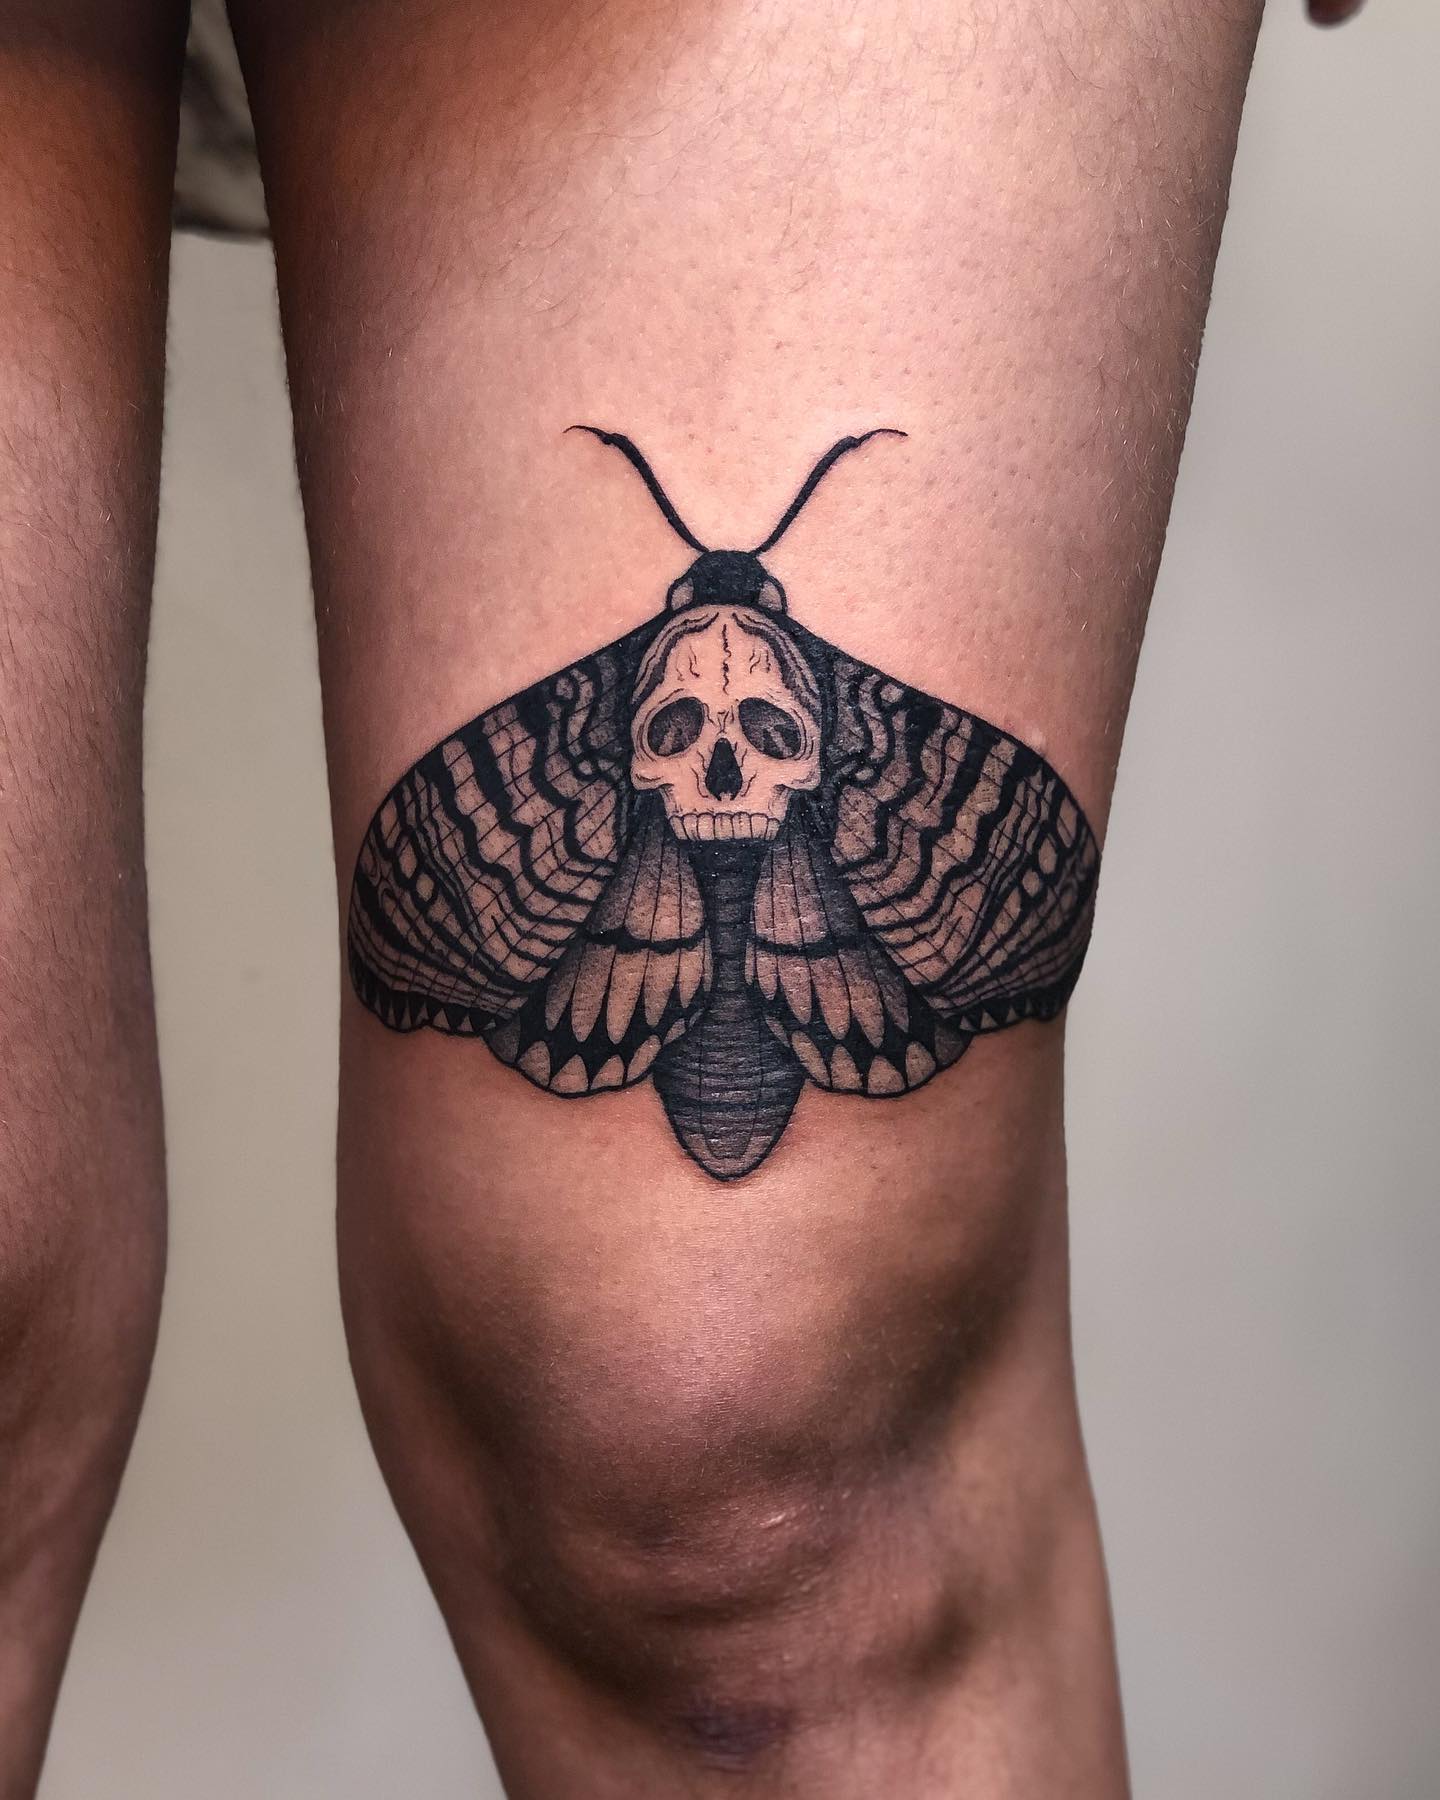 Big black and fierce, this moth tattoo shows a fierce character who is all about growth and personal persistence. It is a scary and attention-seeking design, perfect for those who like to get a ton of comments and those who like the attention for their chosen look.